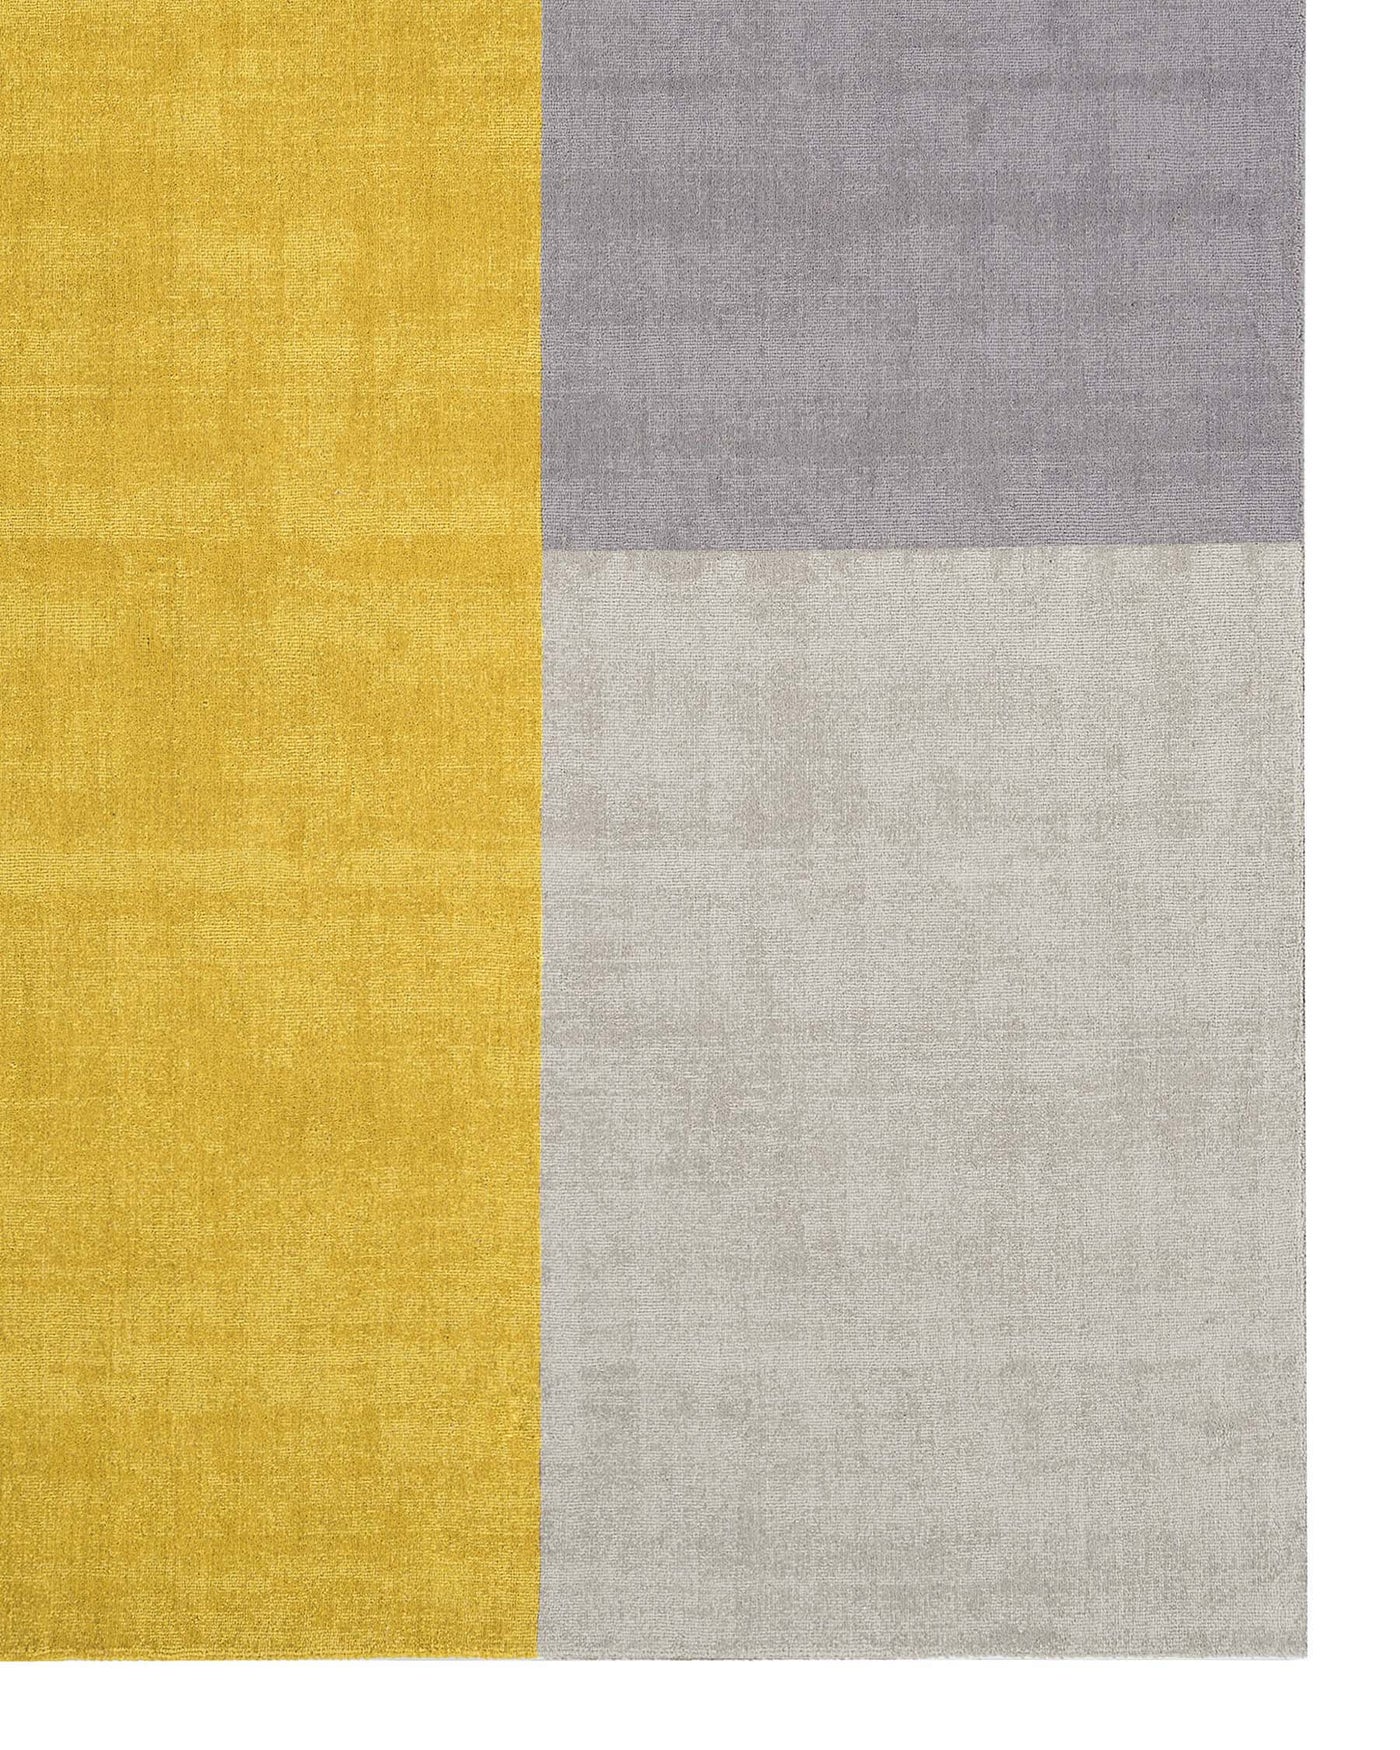 No furniture is displayed in the image; it features a geometric patterned rug with blocks of mustard yellow, light grey, medium grey, and off-white colours.